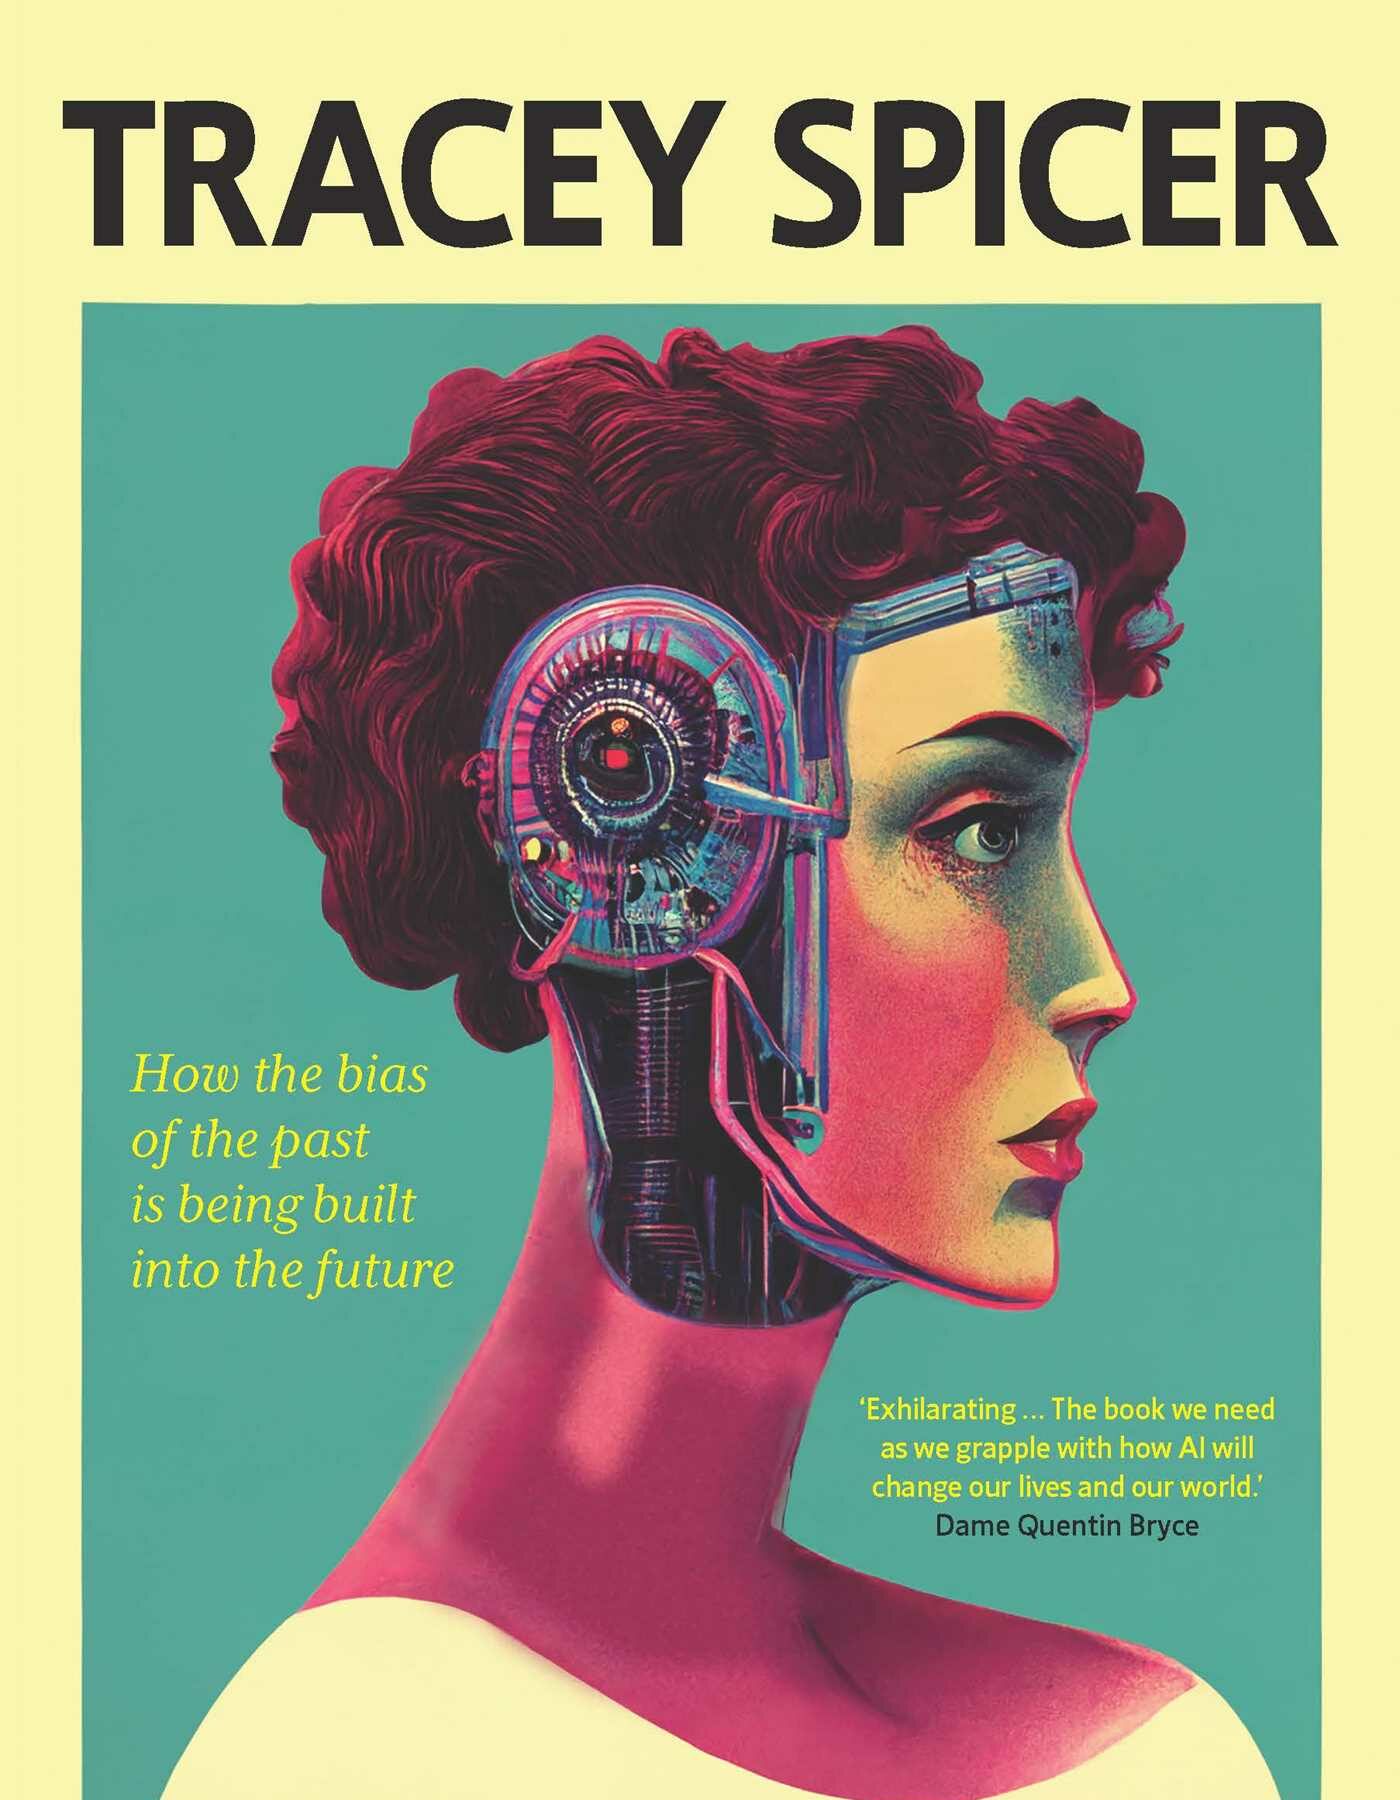 A book cover featuring an illustration of a face and curly hair, with electronic material covering the ear, chin and side of the neck. The author's name is in black letters at the top and the title in pinkish-red at the bottom